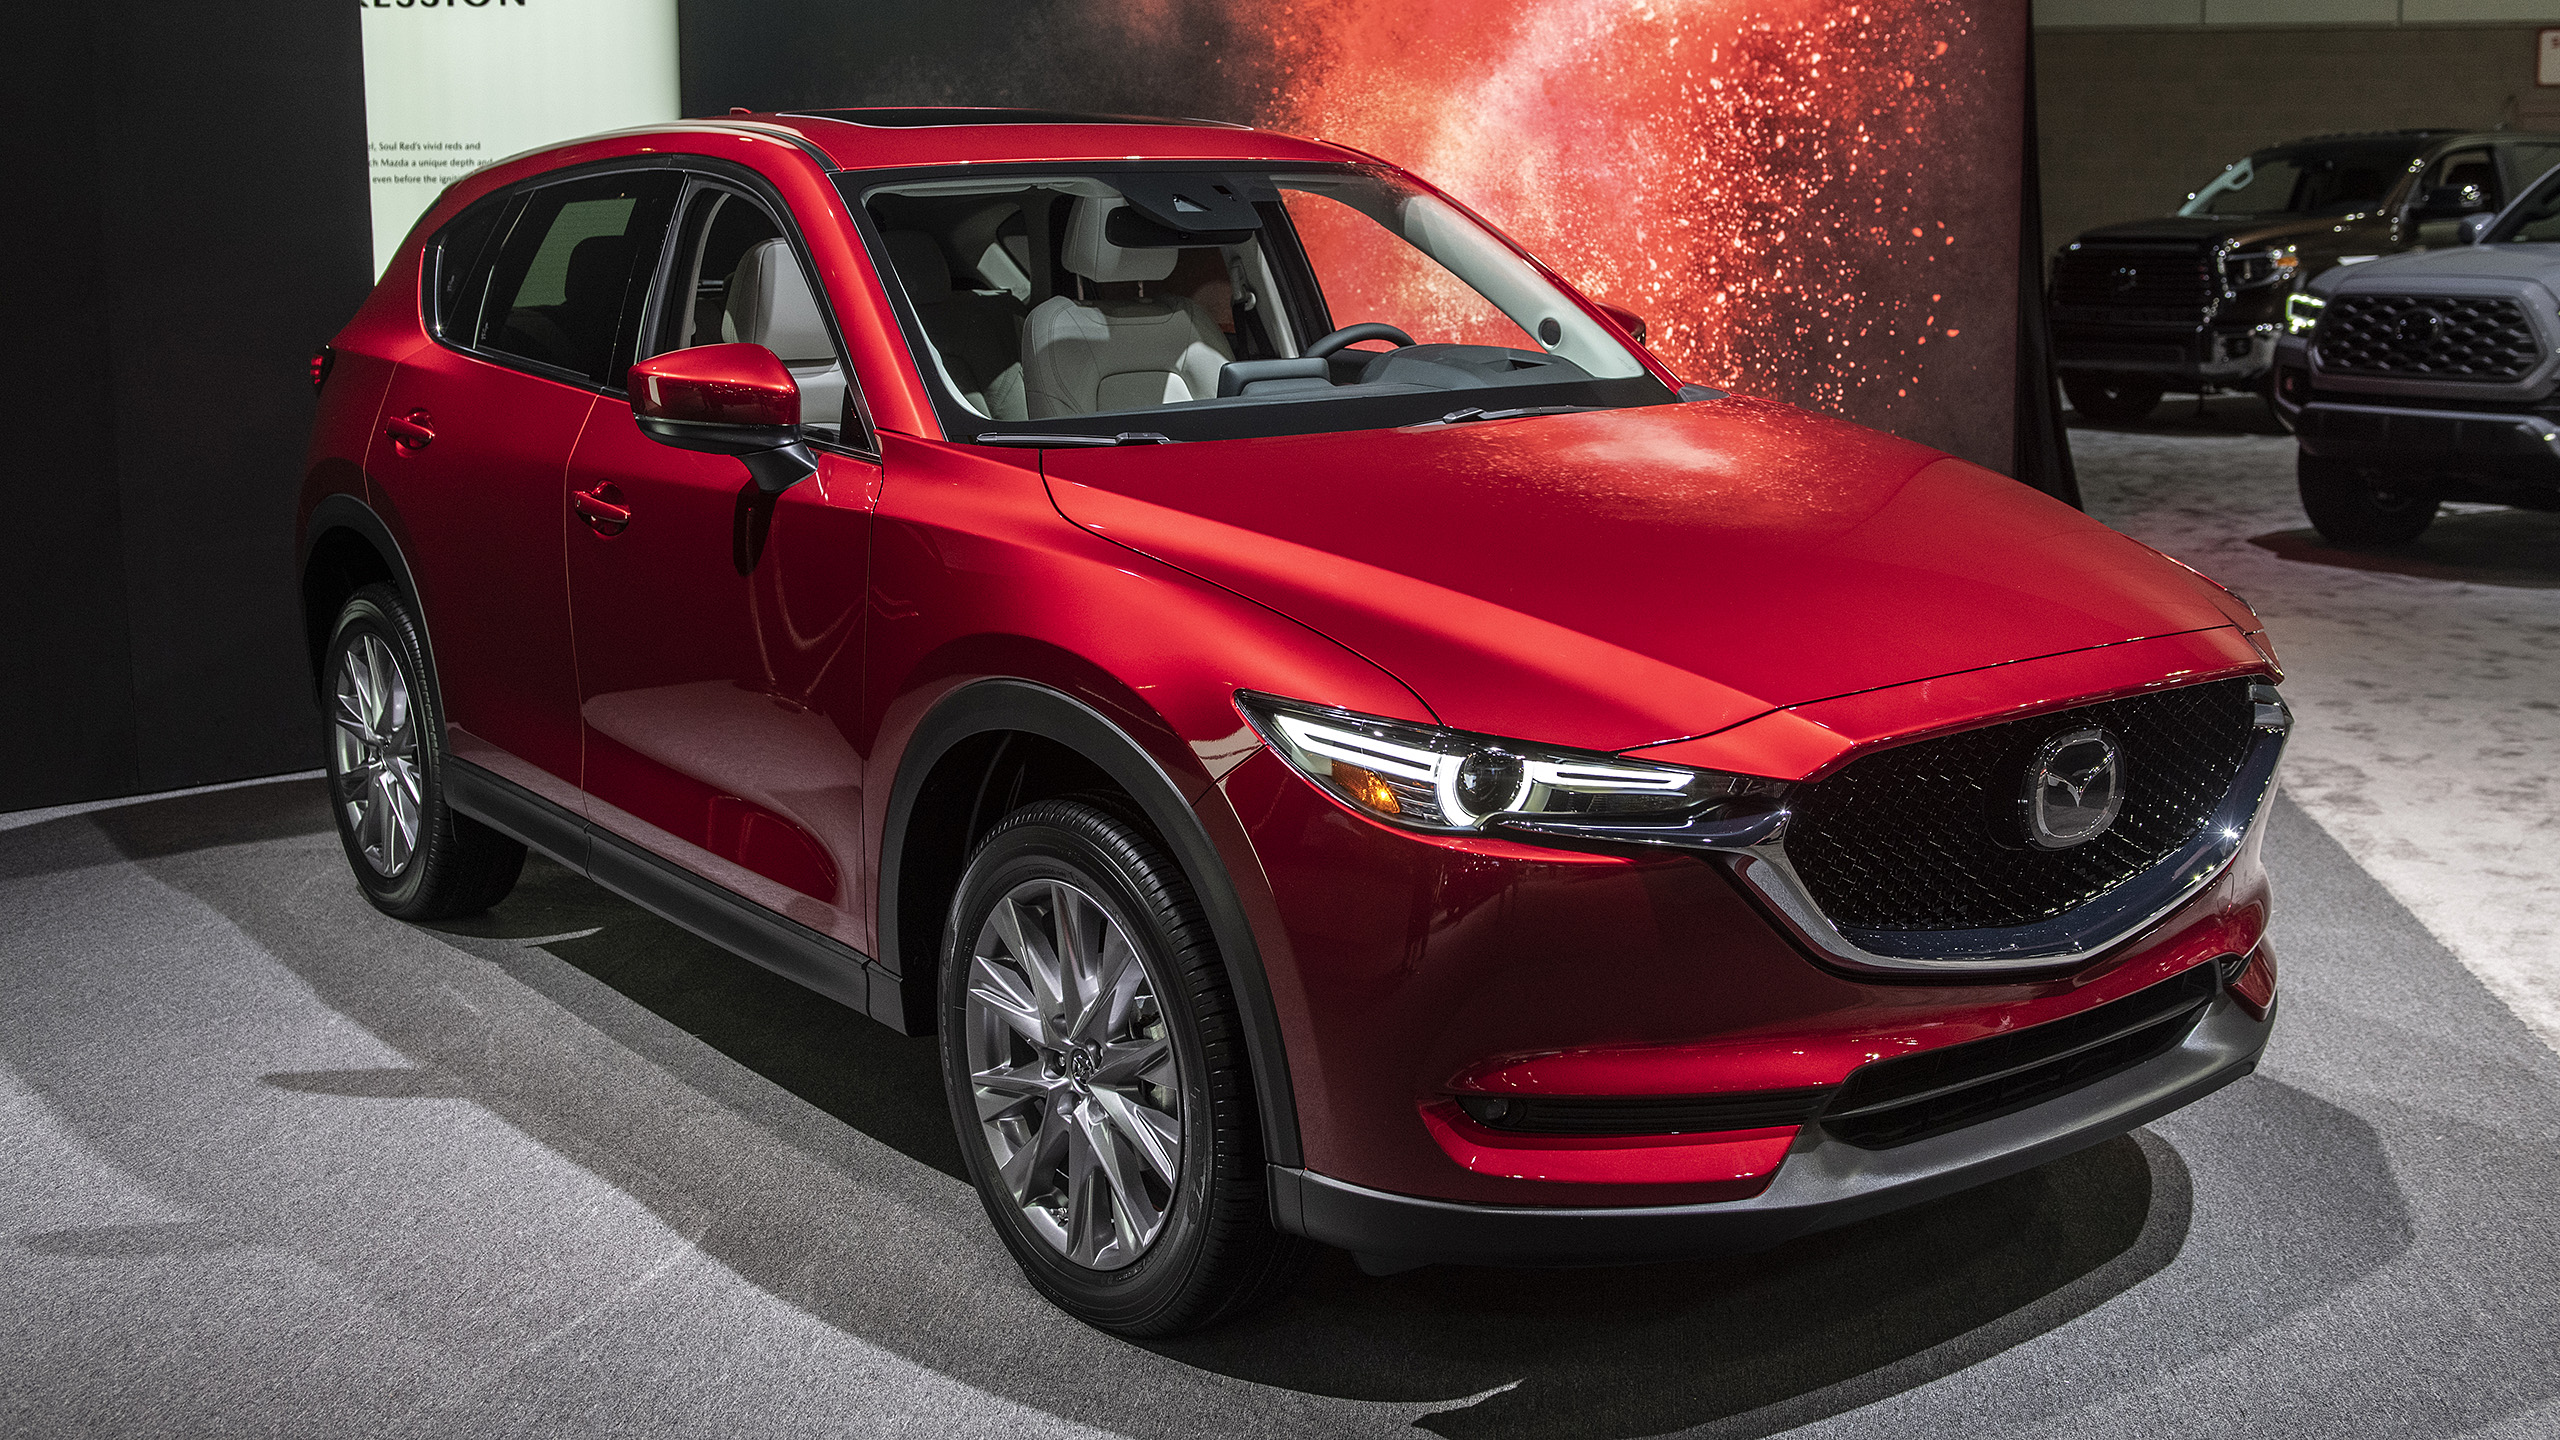 2020 Mazda CX-5 gets a light update with more power and a higher price ...